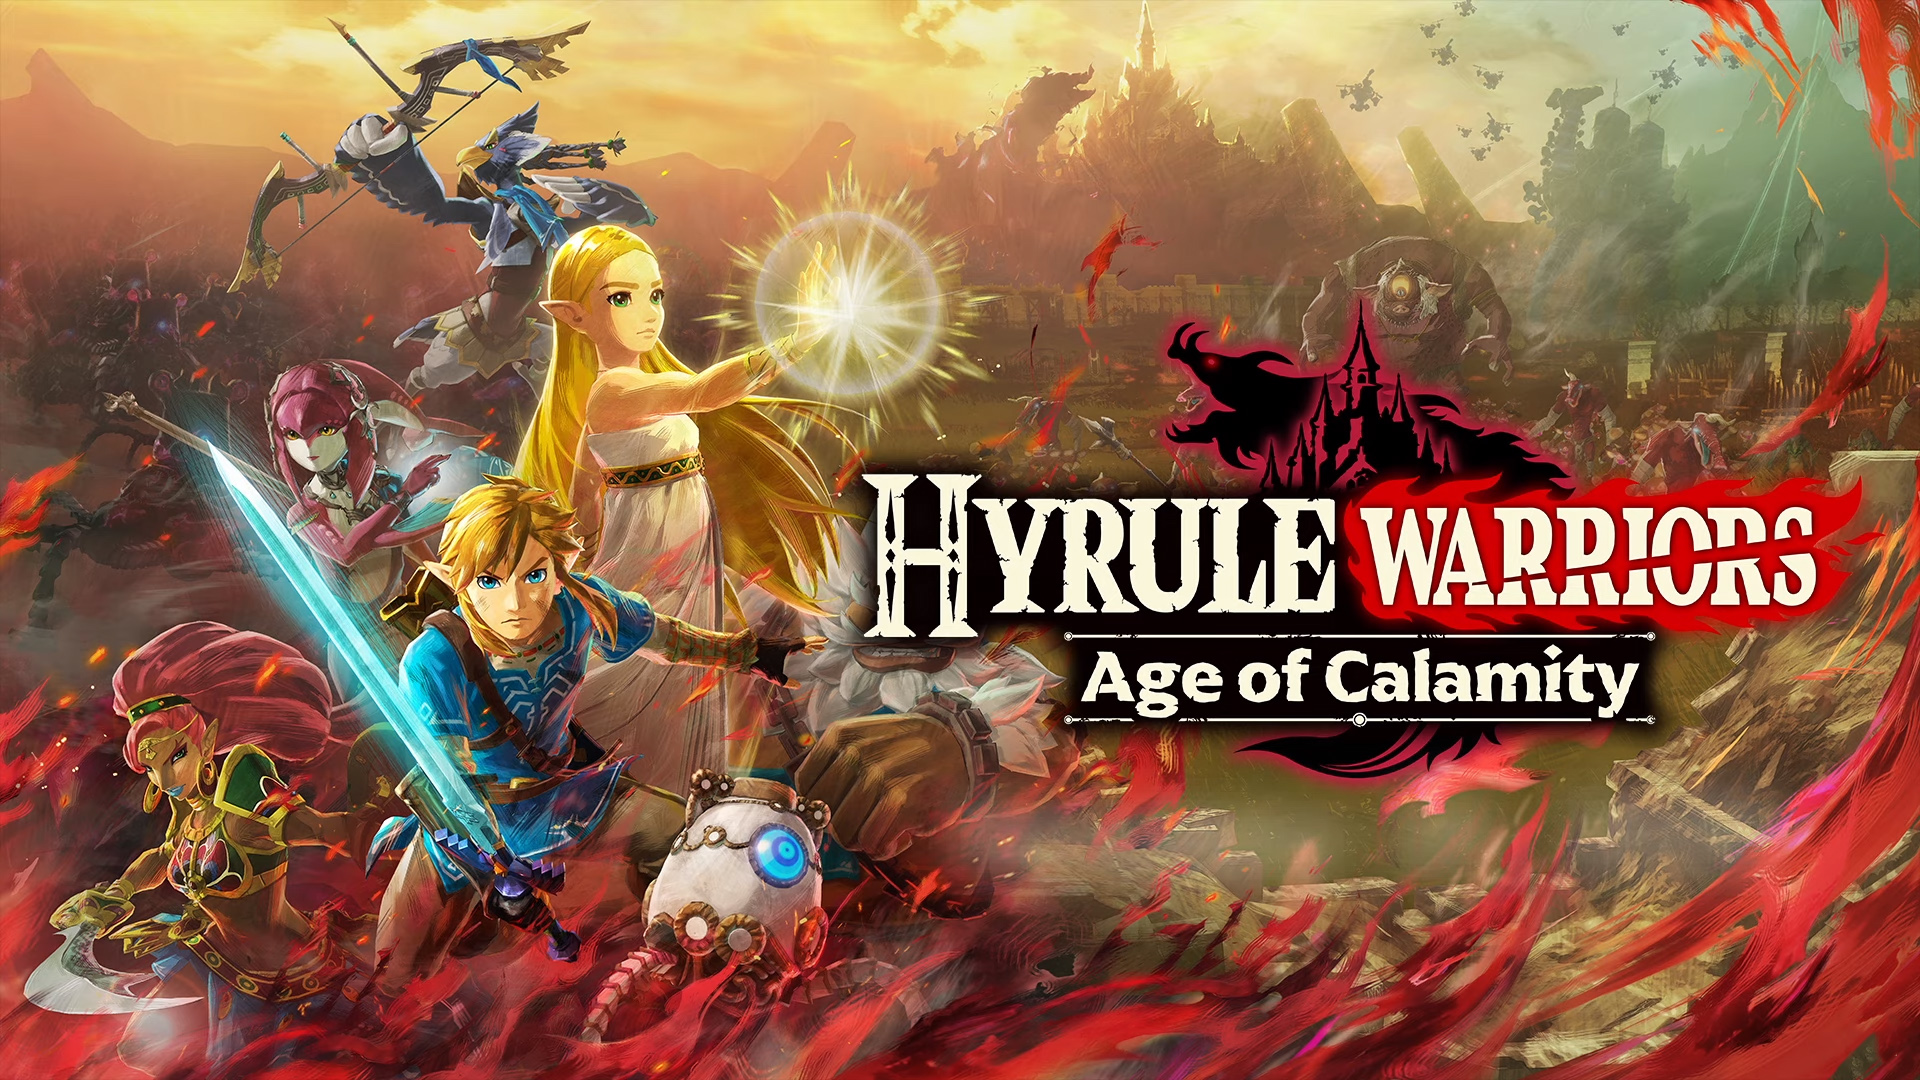 Hyrule Warriors: Age of Calamity trailer and image gallery | Nintendo Wire